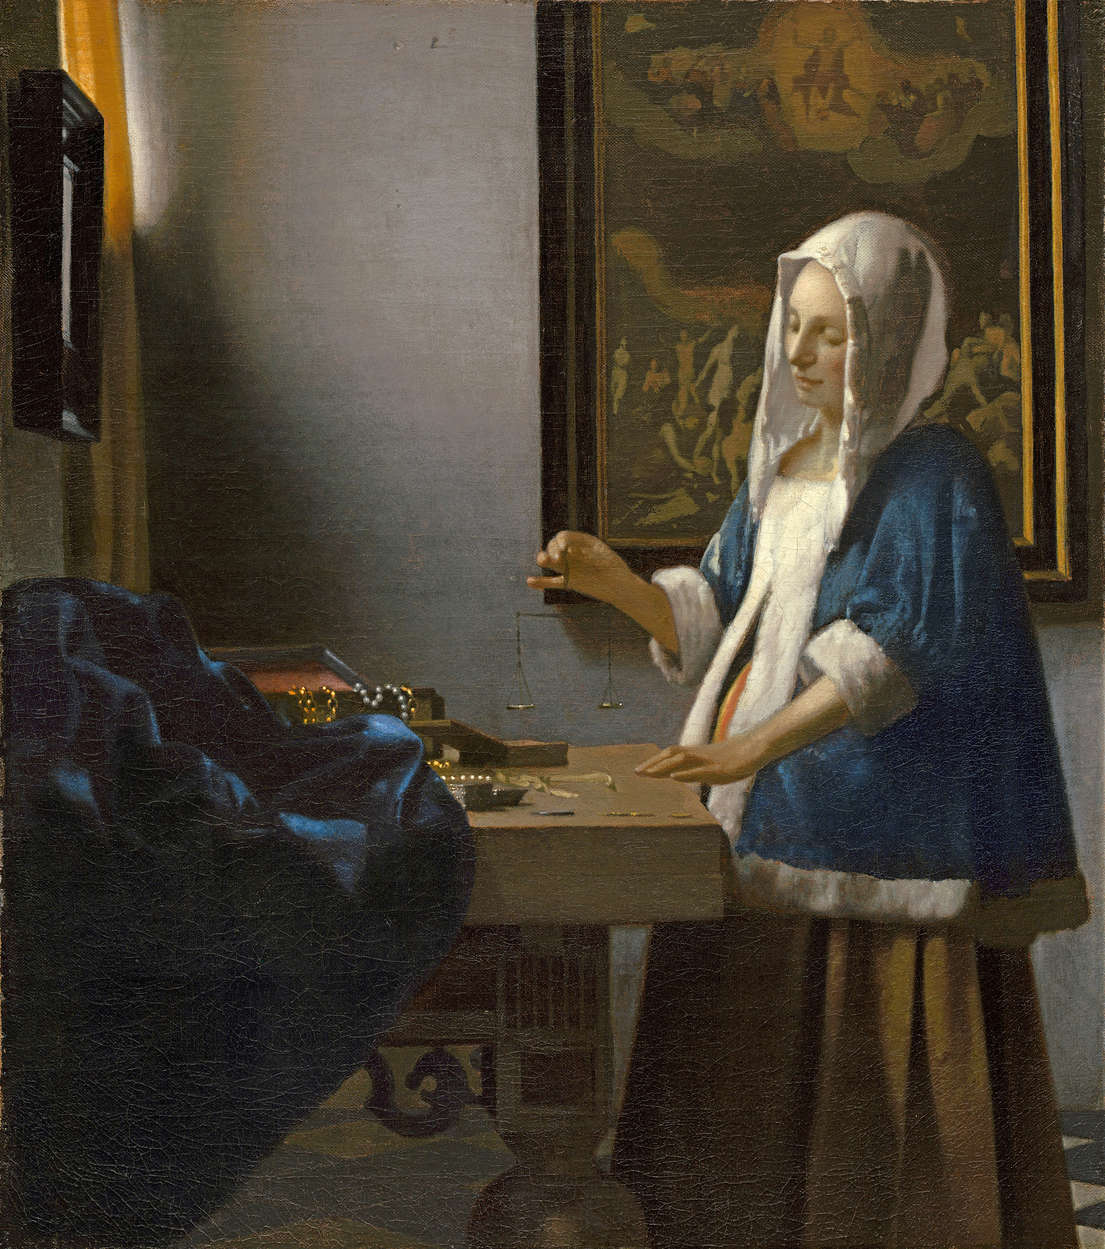             Photo wallpaper "Woman with scales" by Jan Vermeer
        